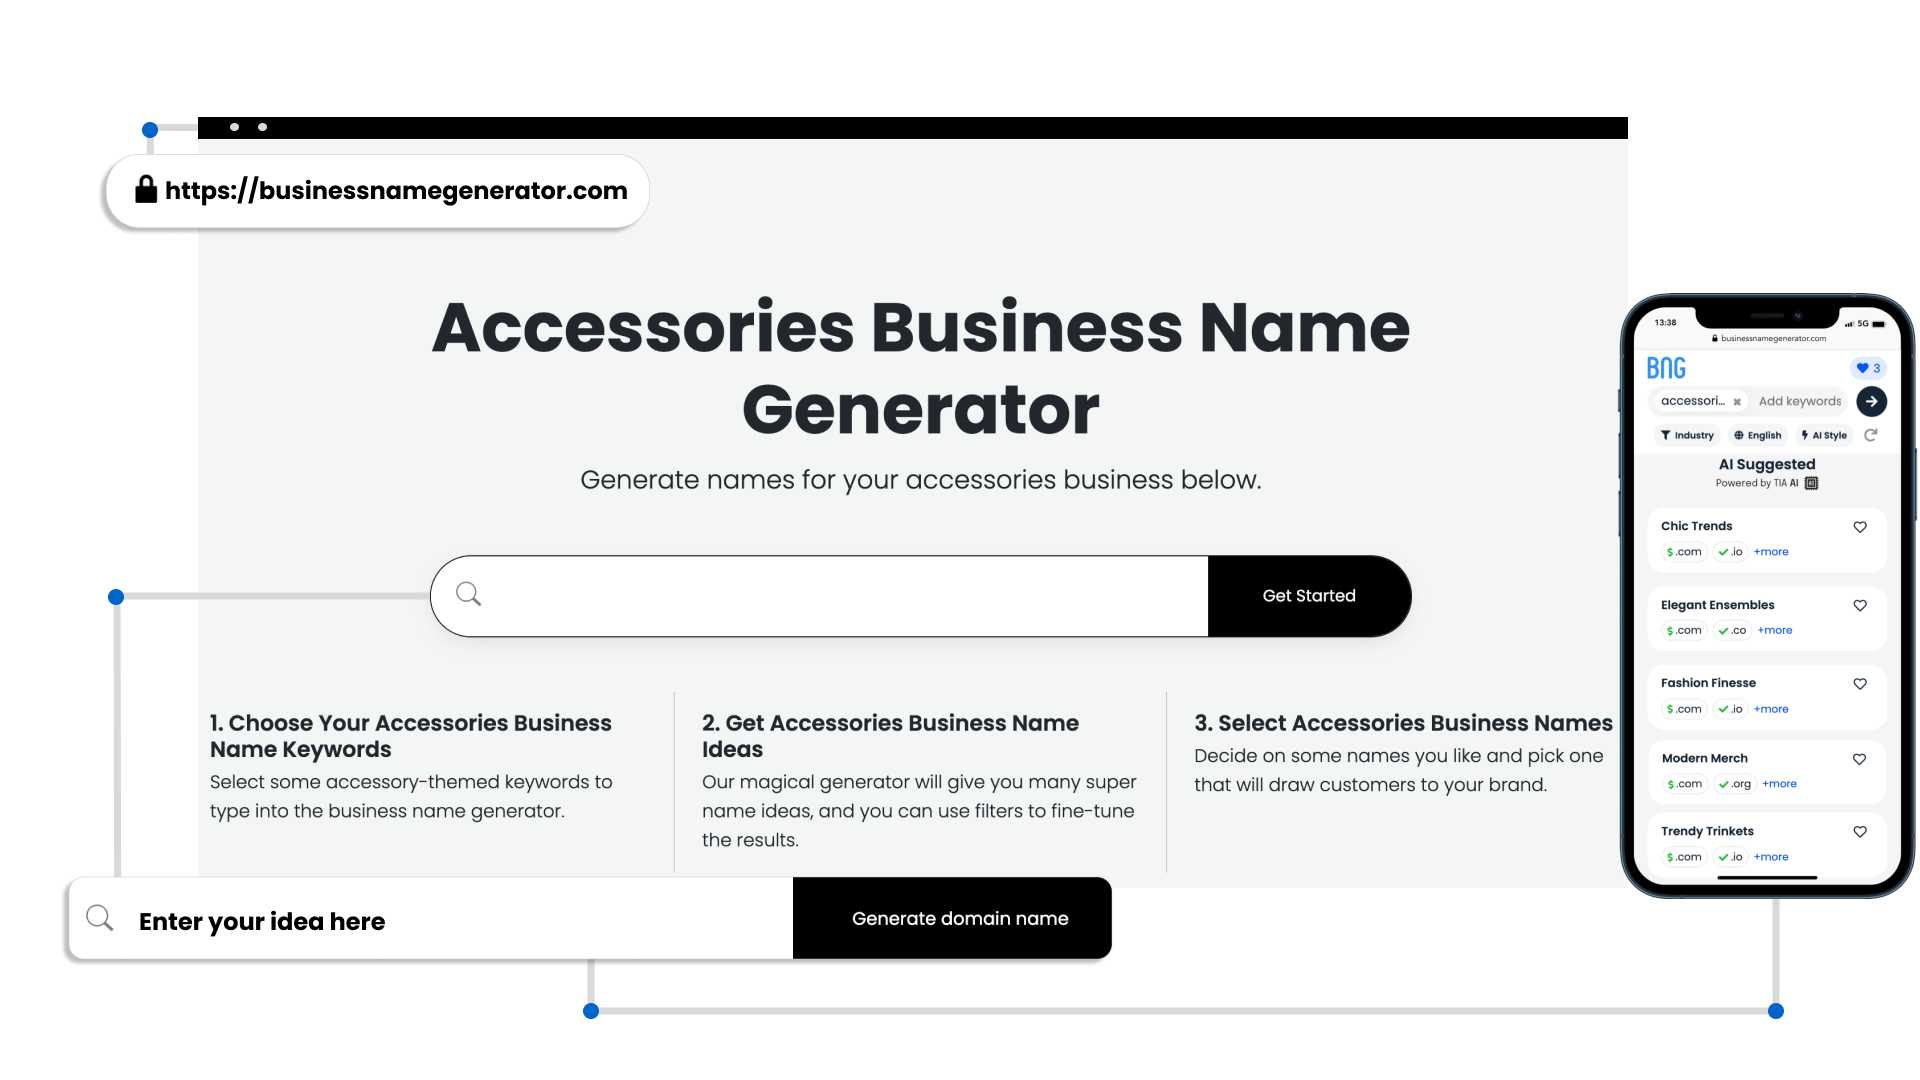 Benefits of Our Accessories Business Name Generator